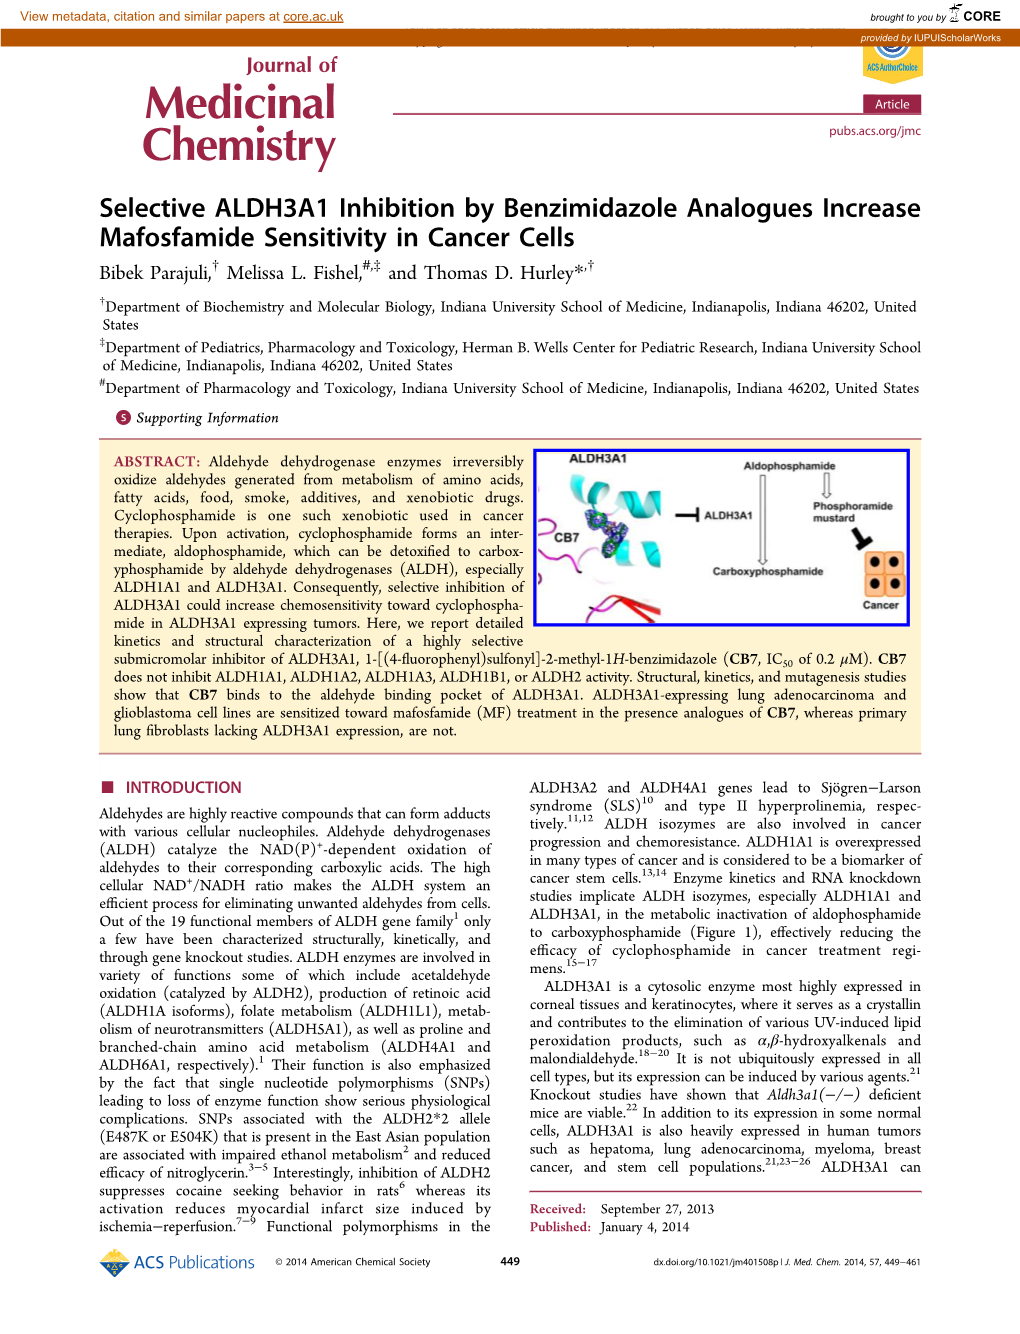 Selective ALDH3A1 Inhibition by Benzimidazole Analogues Increase Mafosfamide Sensitivity in Cancer Cells Bibek Parajuli,† Melissa L